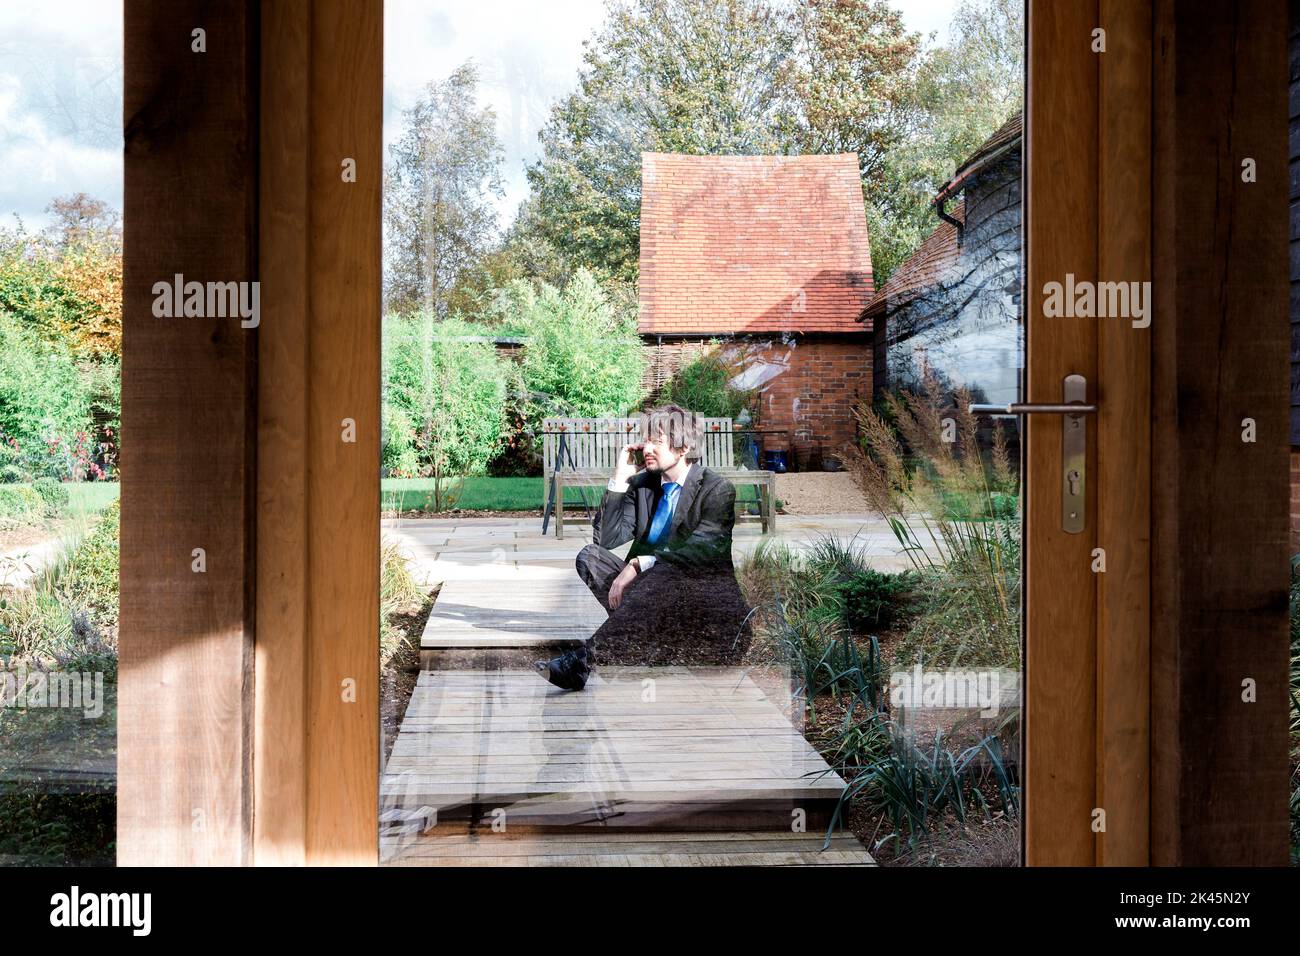 Man sitting on path to house, seen through glass door. Stock Photo